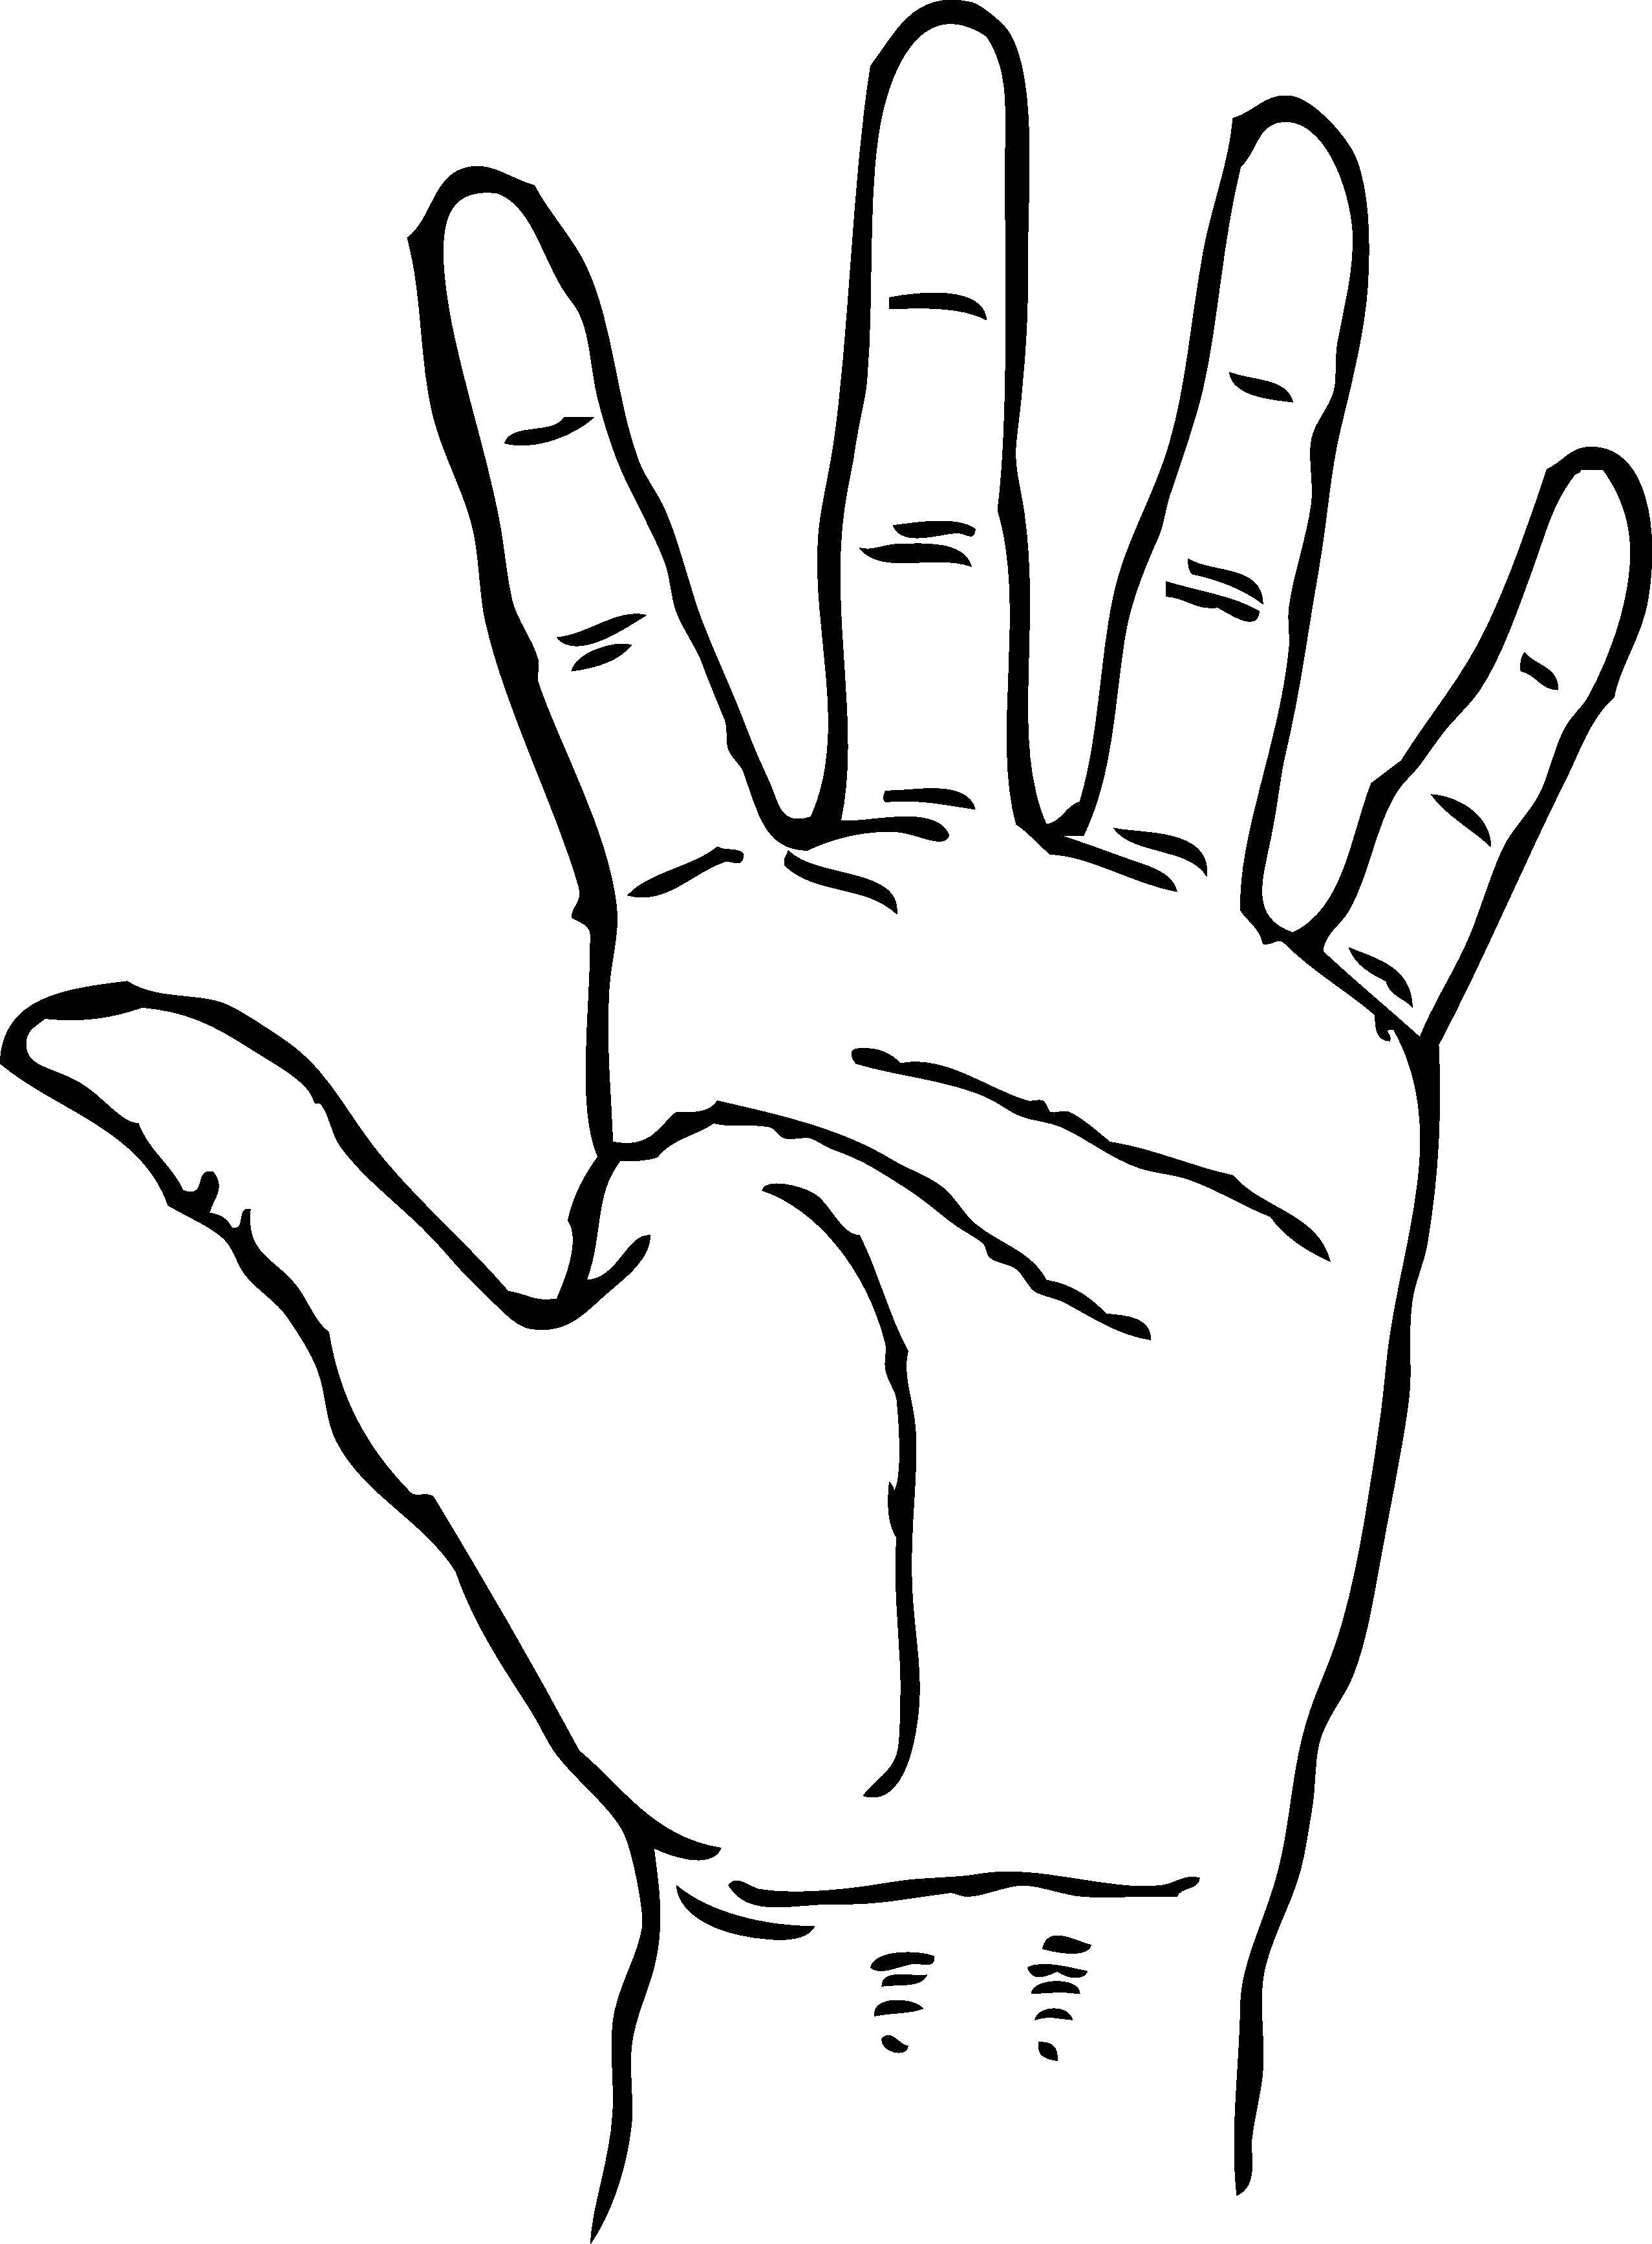 Coloring Hand with lines. Category The contour of the hands and palms to cut. Tags:  hand, palm, eye.